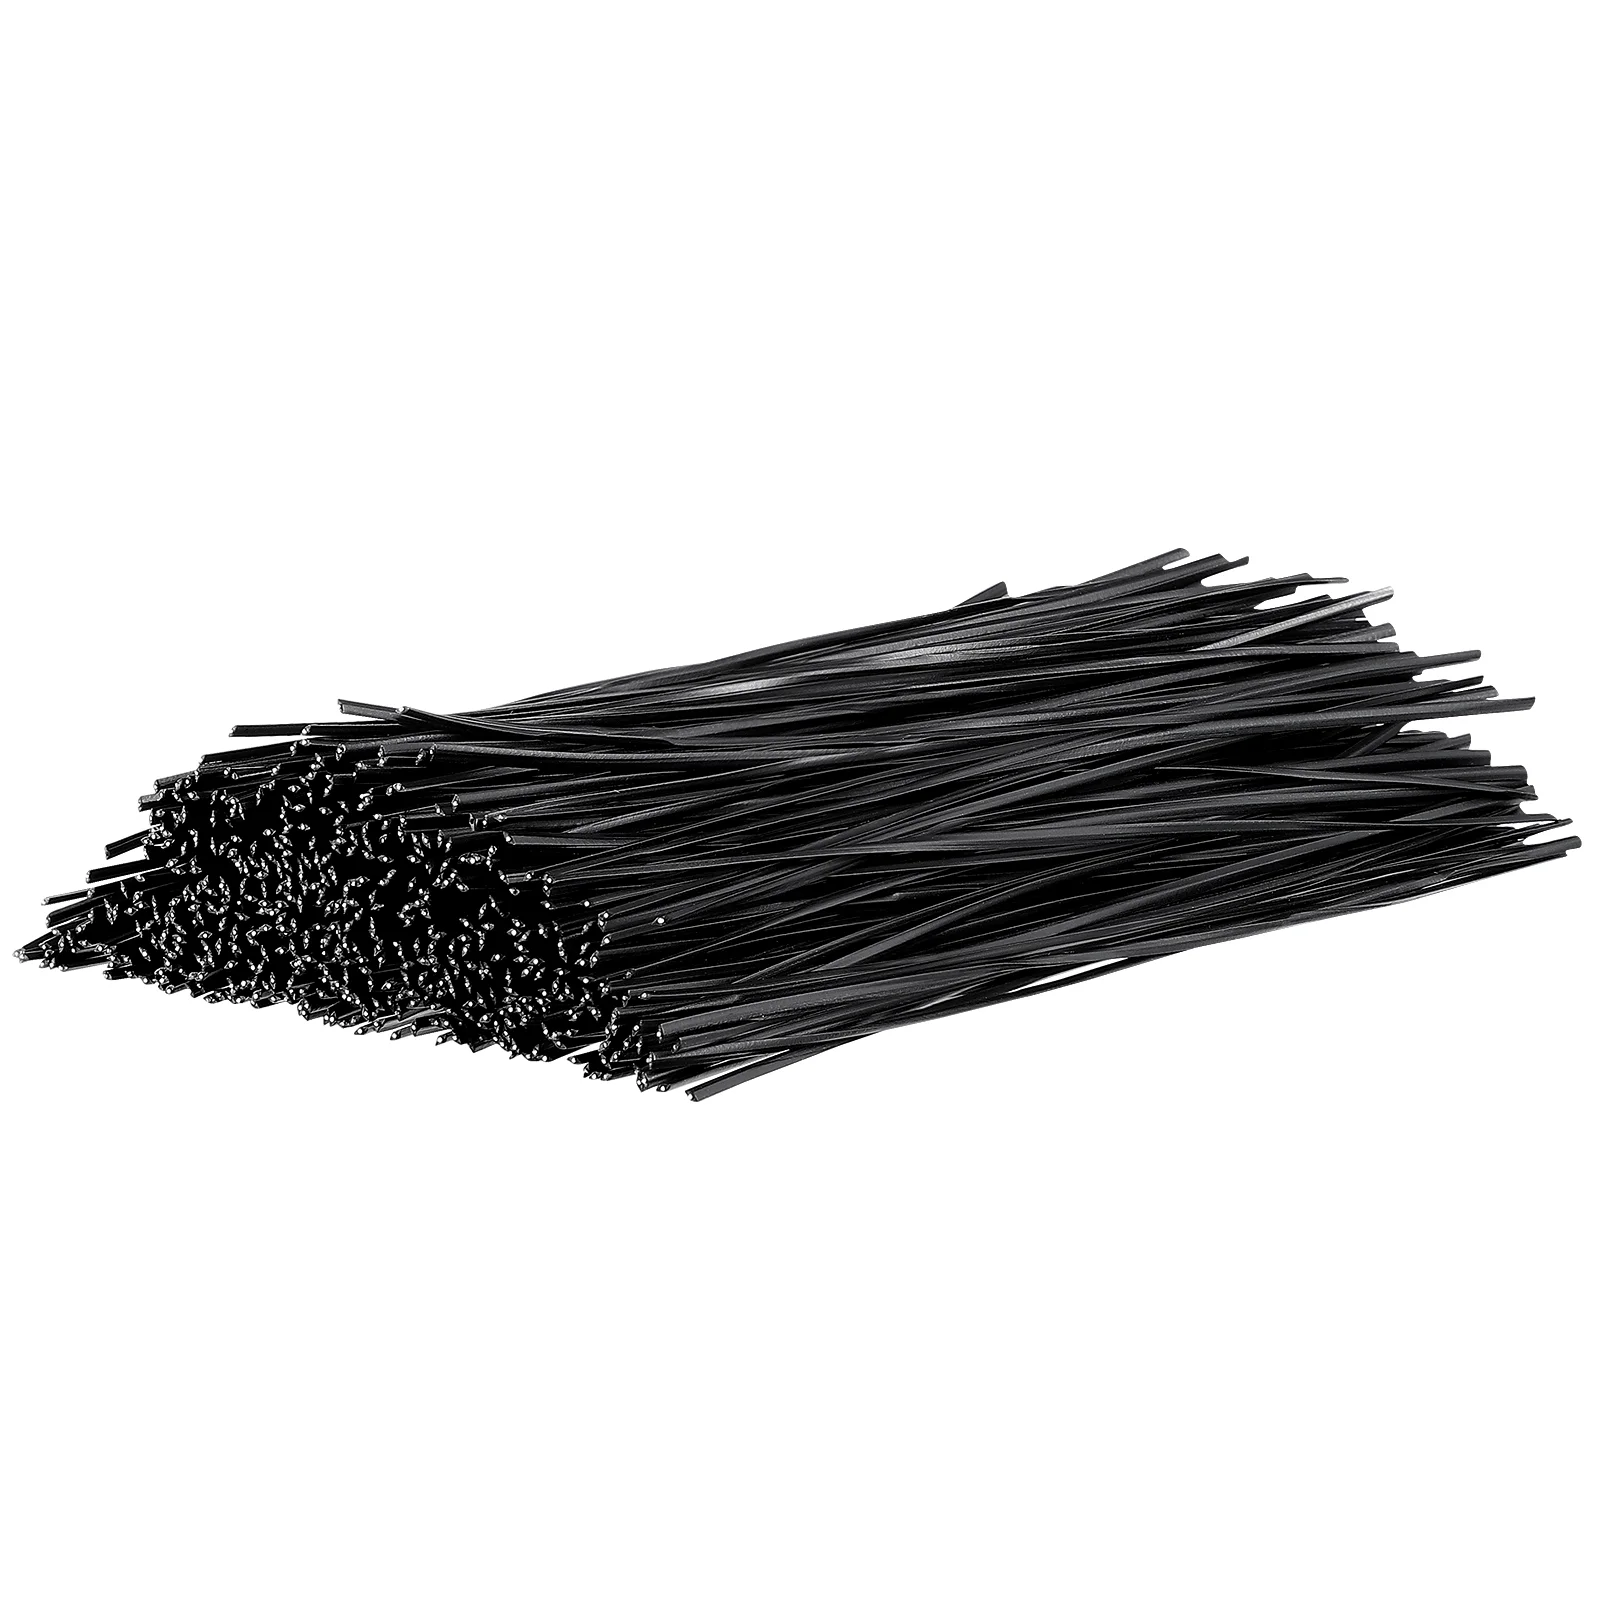 500pcs Wire Ties Cord Ties Ties Twists Ties For Cables Reusable Black Coated Ties for Household and Office Use